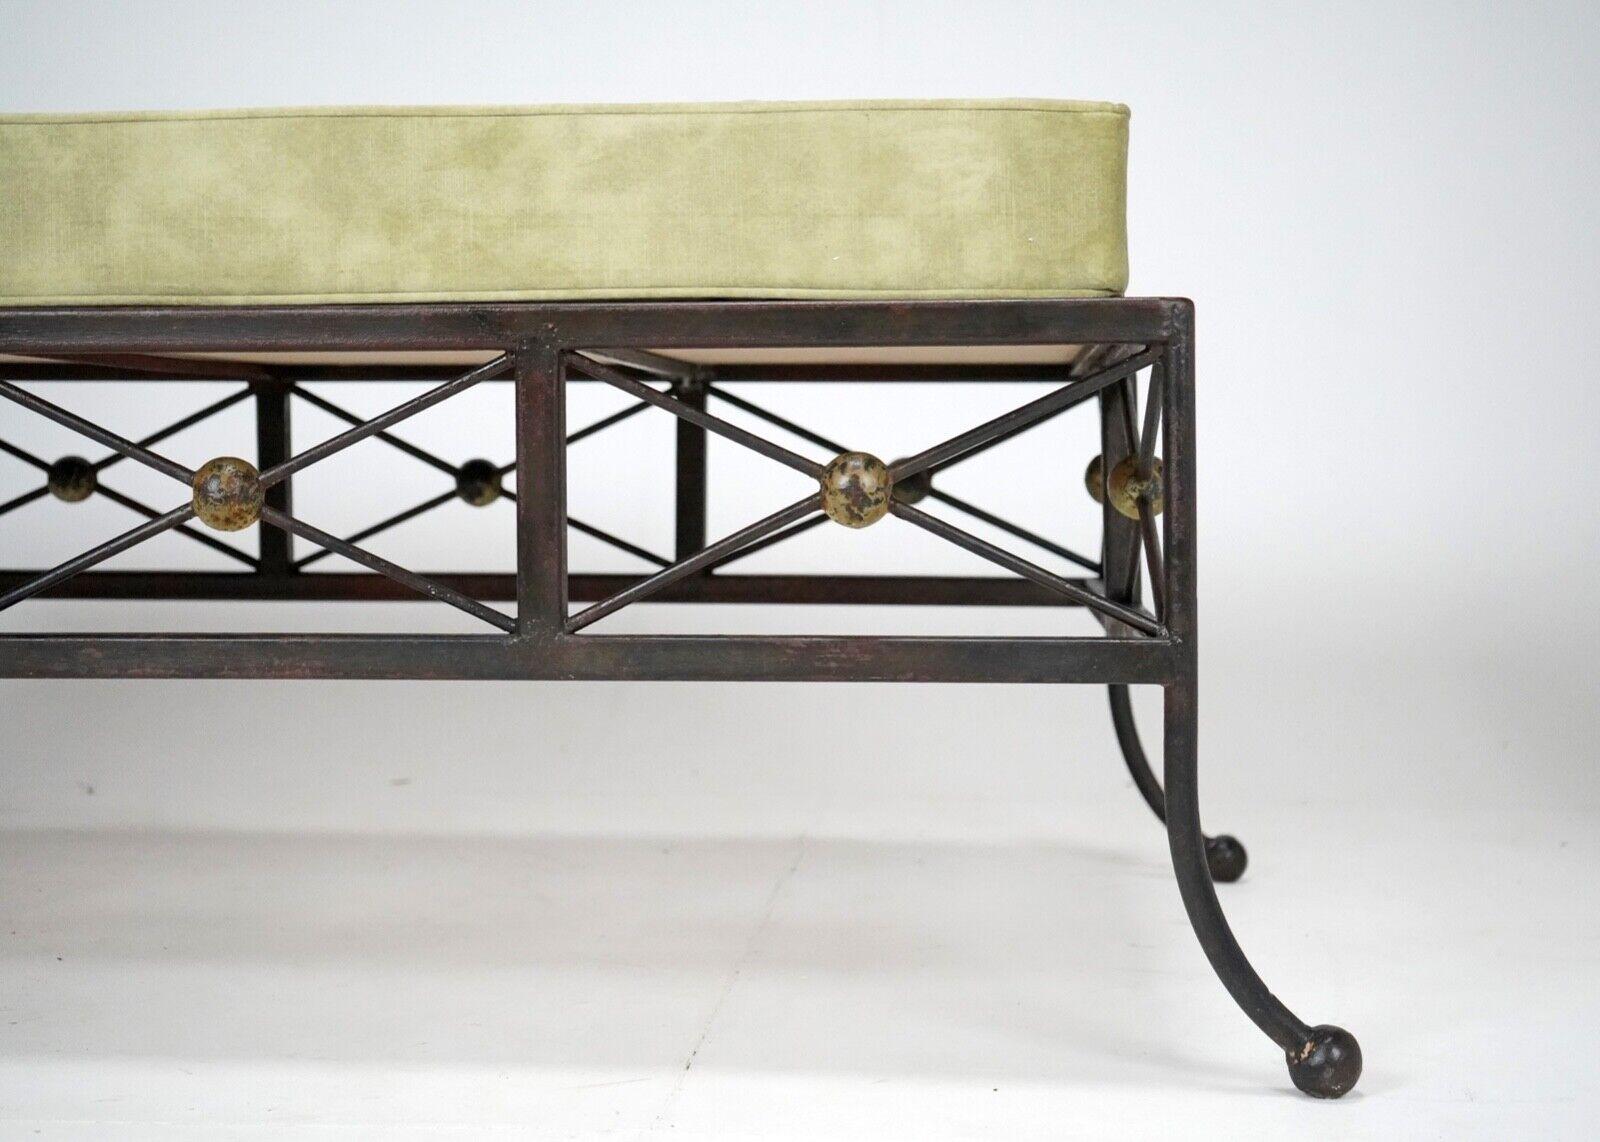 Vintage French Box Steel Metal Day Bed, Sun Lounger, Chaise Lounge Green Seat 1